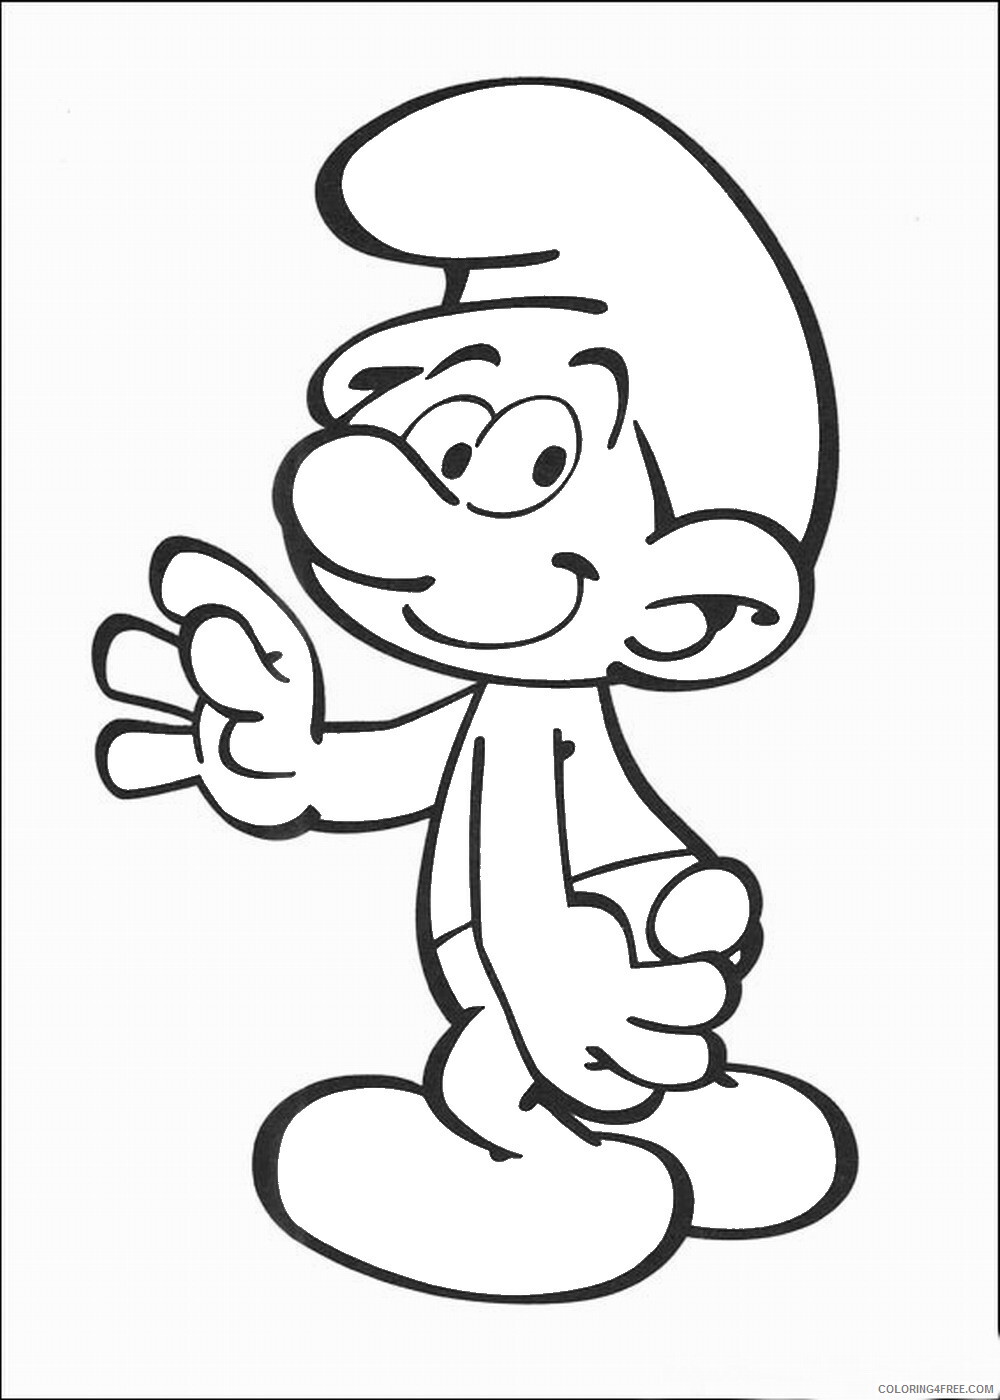 The Smurfs Coloring Pages TV Film smurfs_27 Printable 2020 09728 Coloring4free